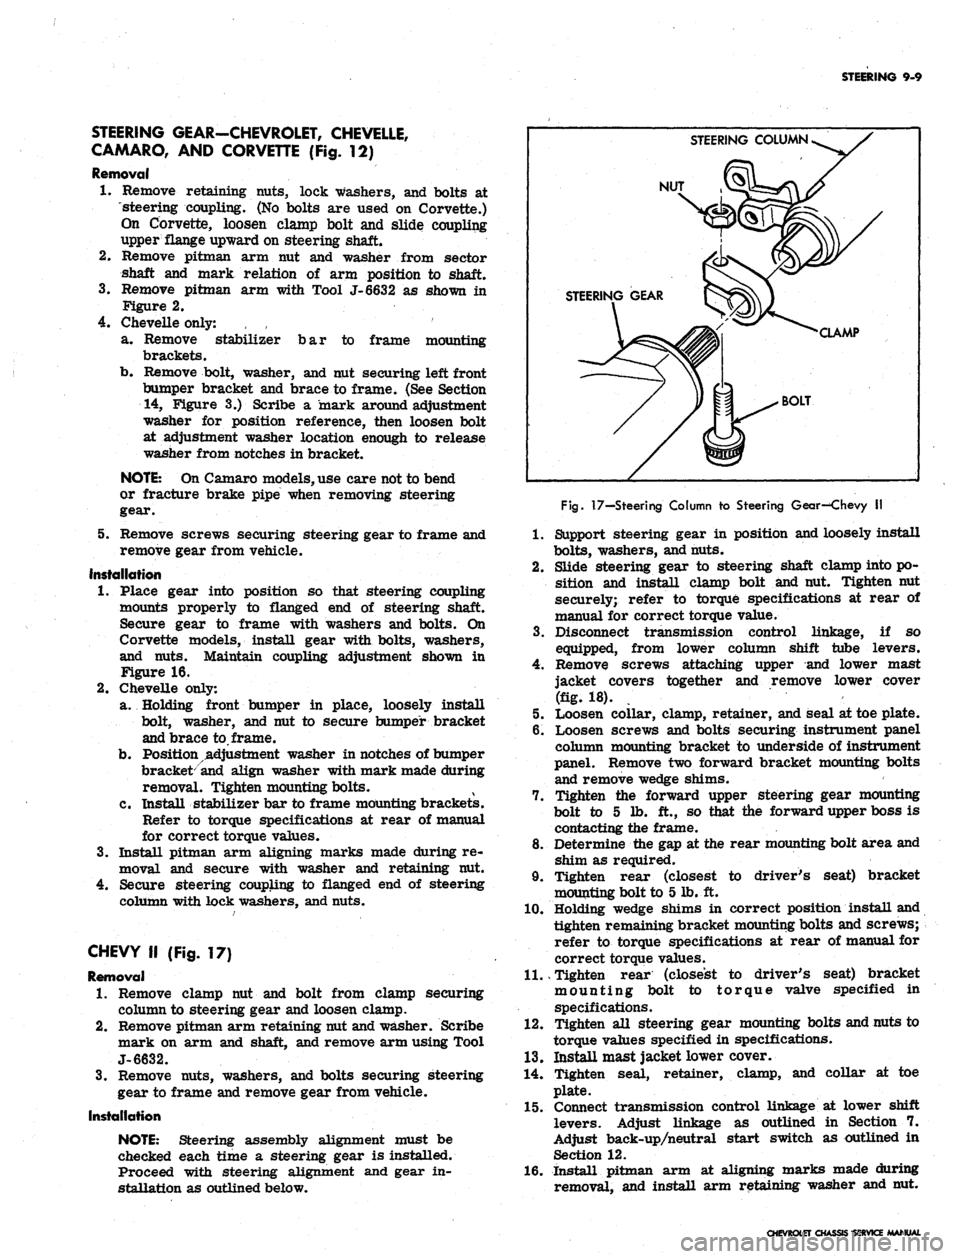 CHEVROLET CAMARO 1967 1.G Chassis Workshop Manual 
STEERING 9-9

STEERING GEAR-CHEVROLET, CHEVELLE,

CAMARO, AND CORVETTE (Fig. 12)

Removal

1.
 Remove retaining nuts, lock washers, and bolts at

steering coupling. (No bolts are used on Corvette.)

